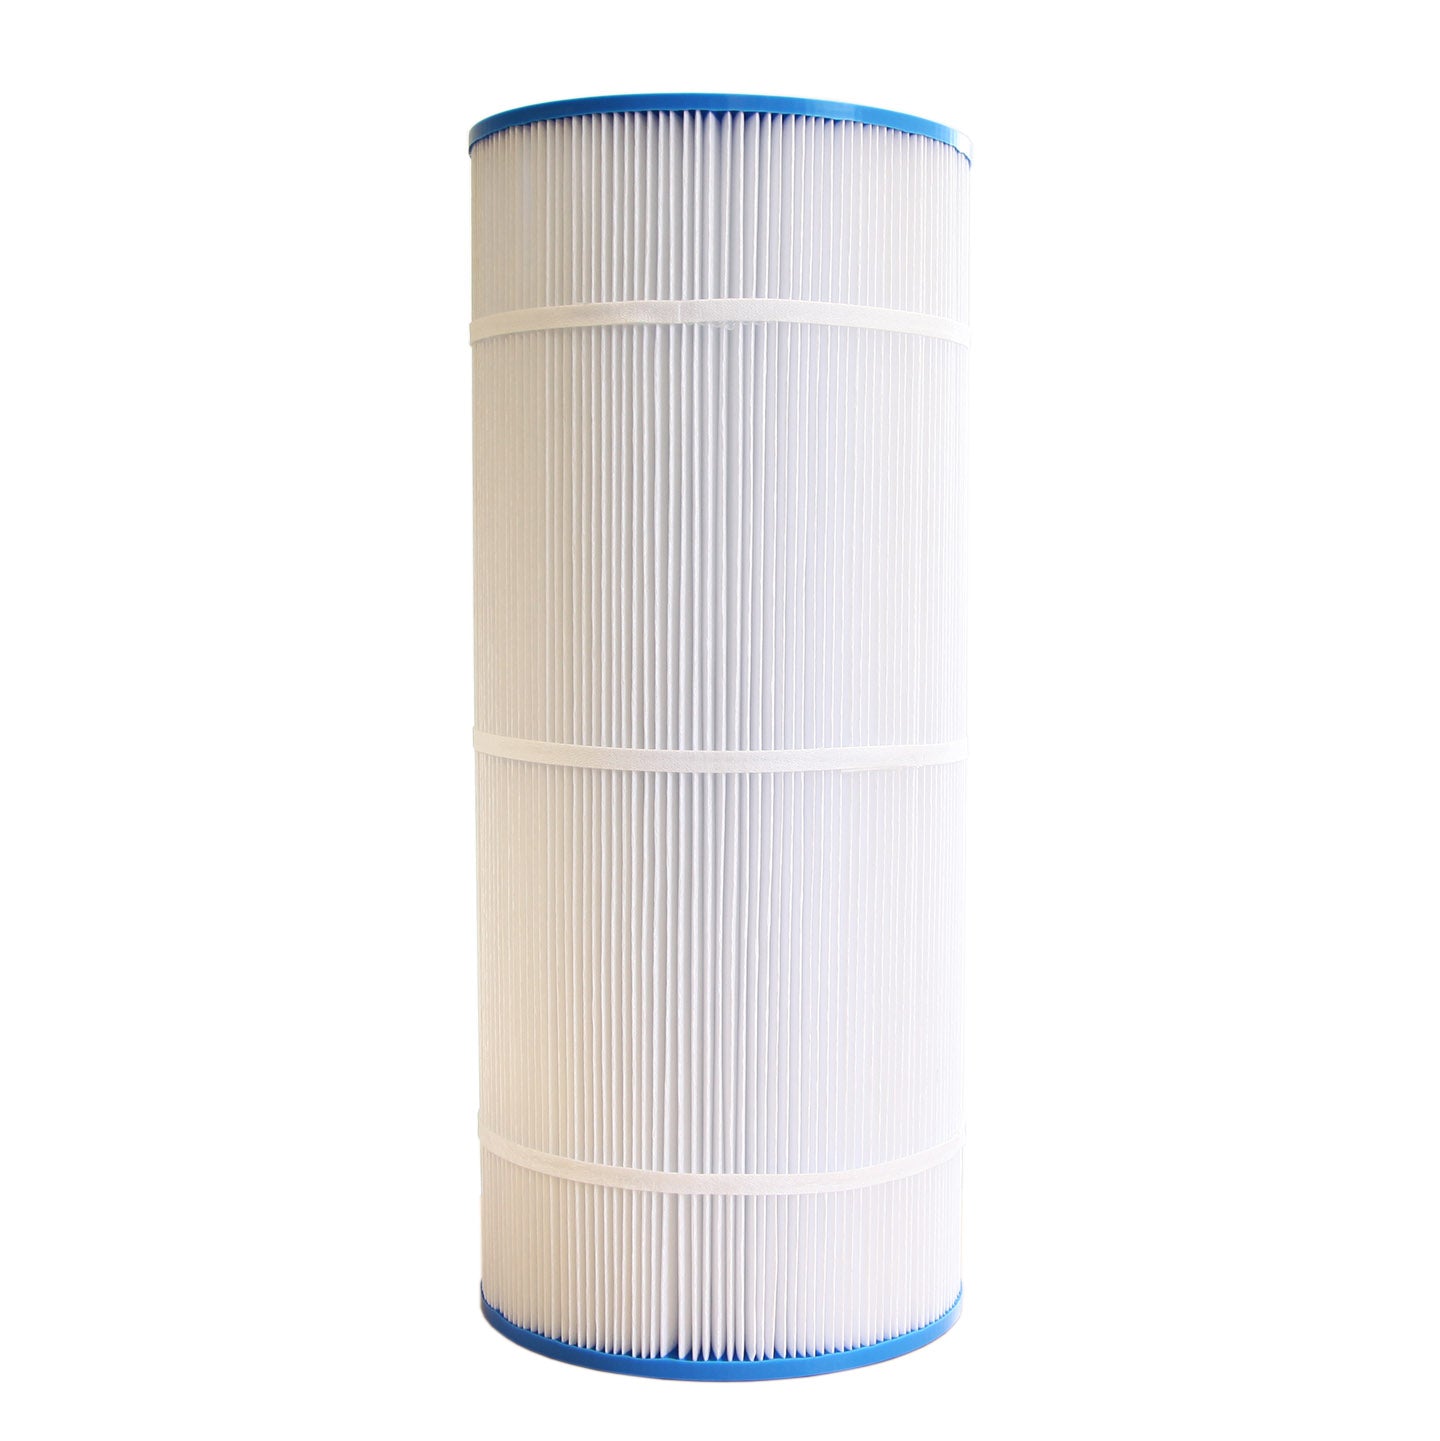 Tier1 Pleatco PAP100 and PAP100-4 Replacement Pool Filter